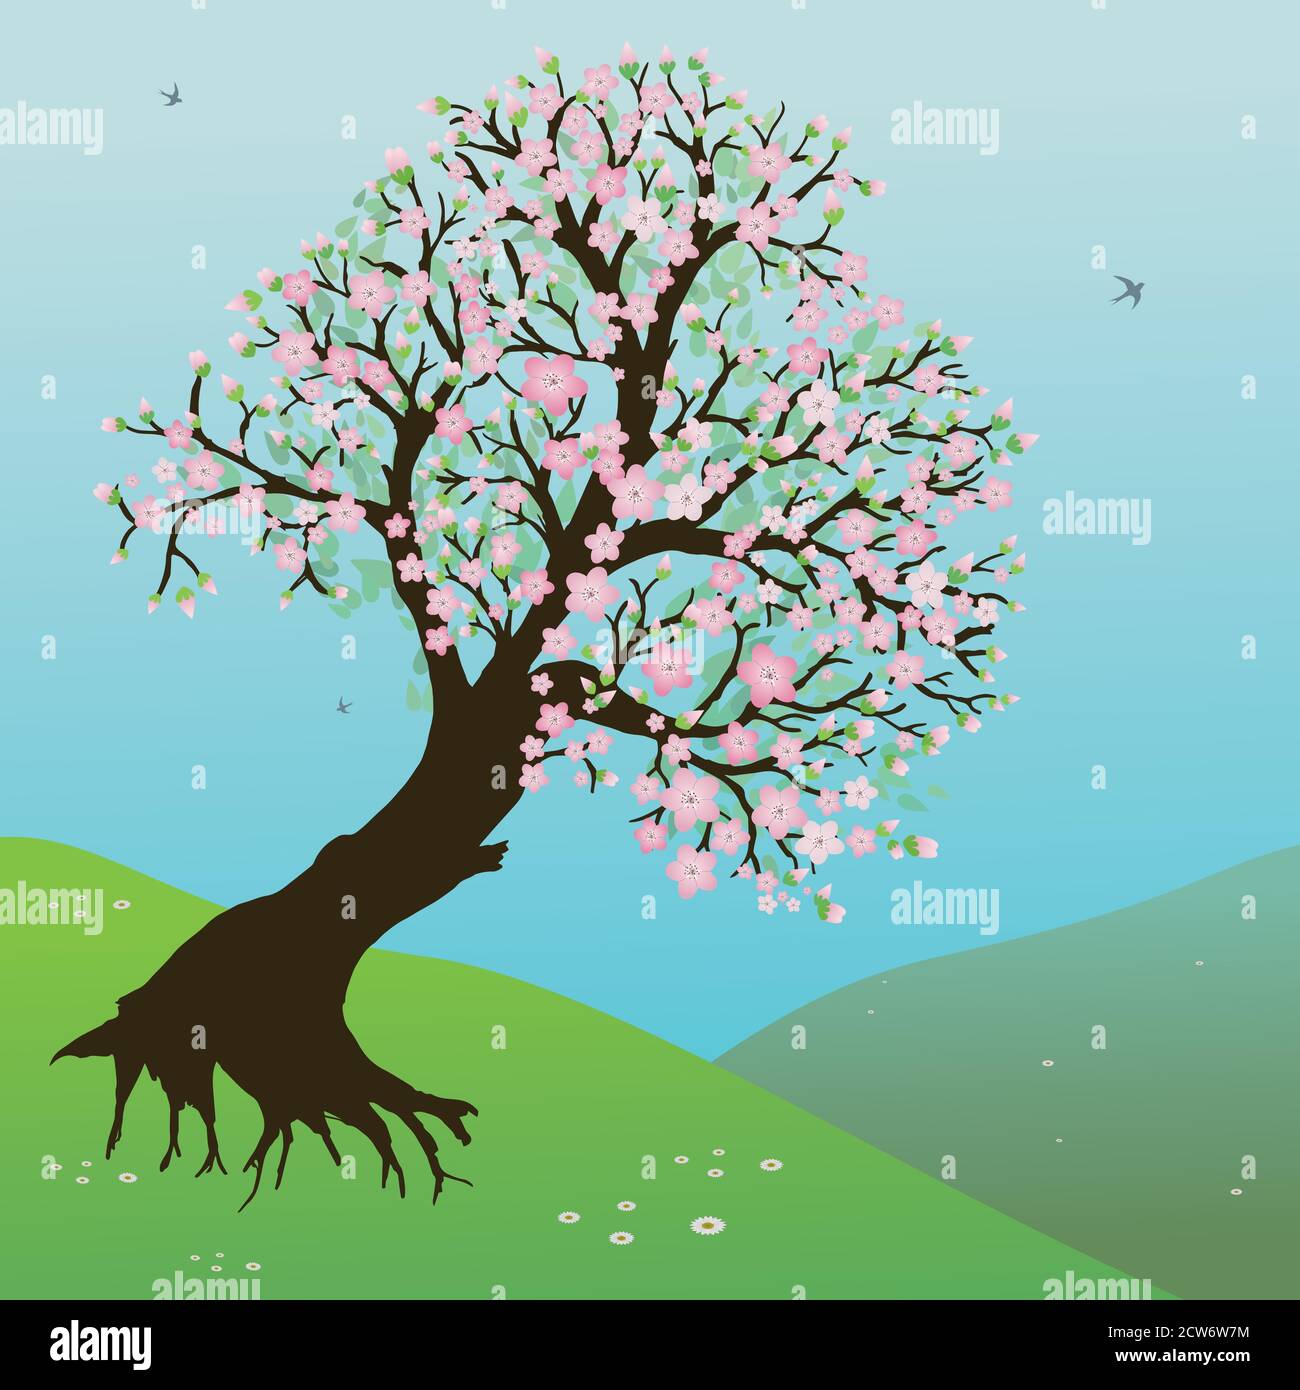 Landscape with hills, grass and  a pretty blossom tree.The sky is blue. In the sky there are birds flying. Stock Vector